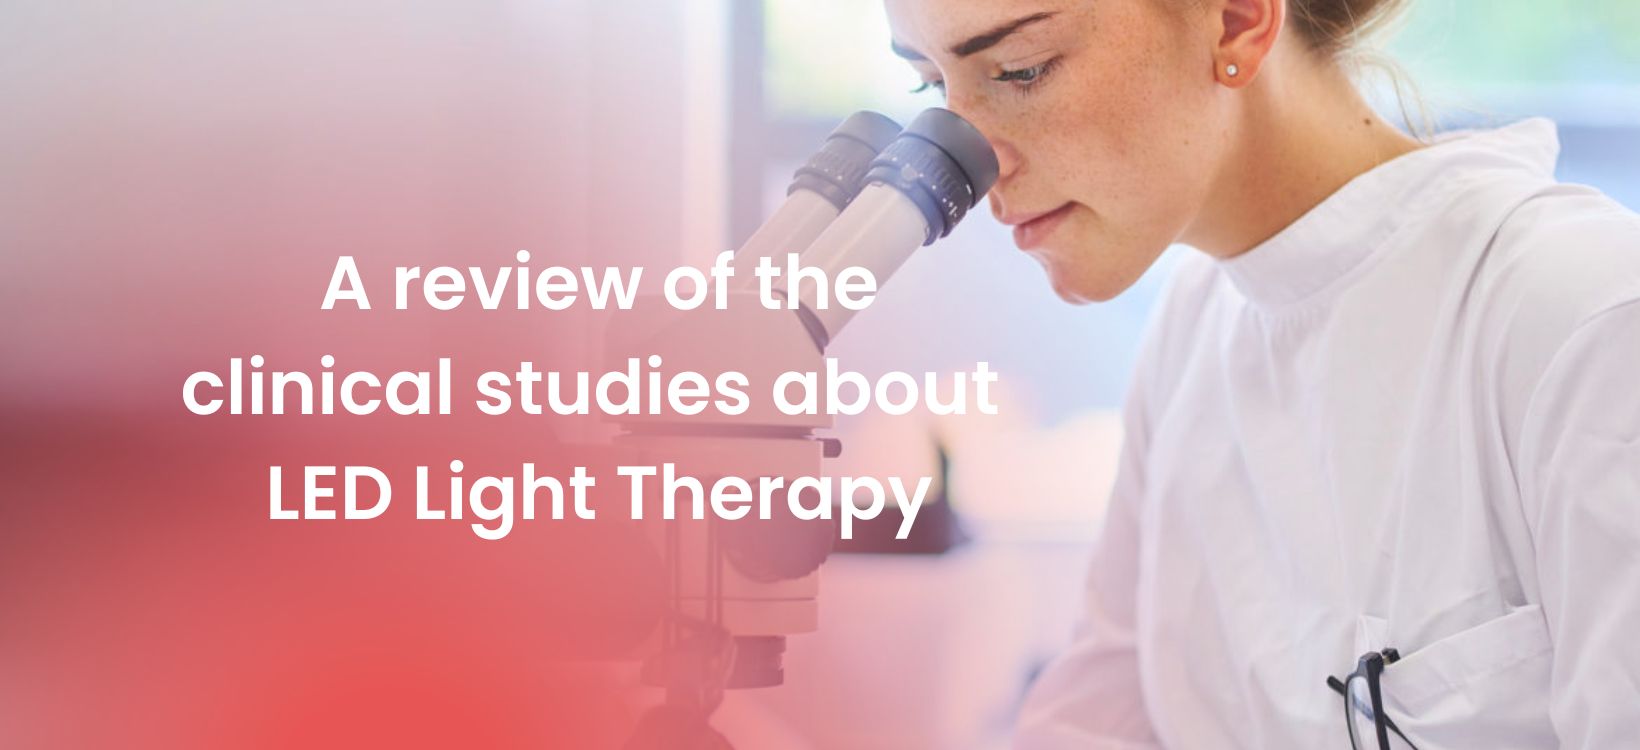 A review of the clinical studies about LED Light Therapy